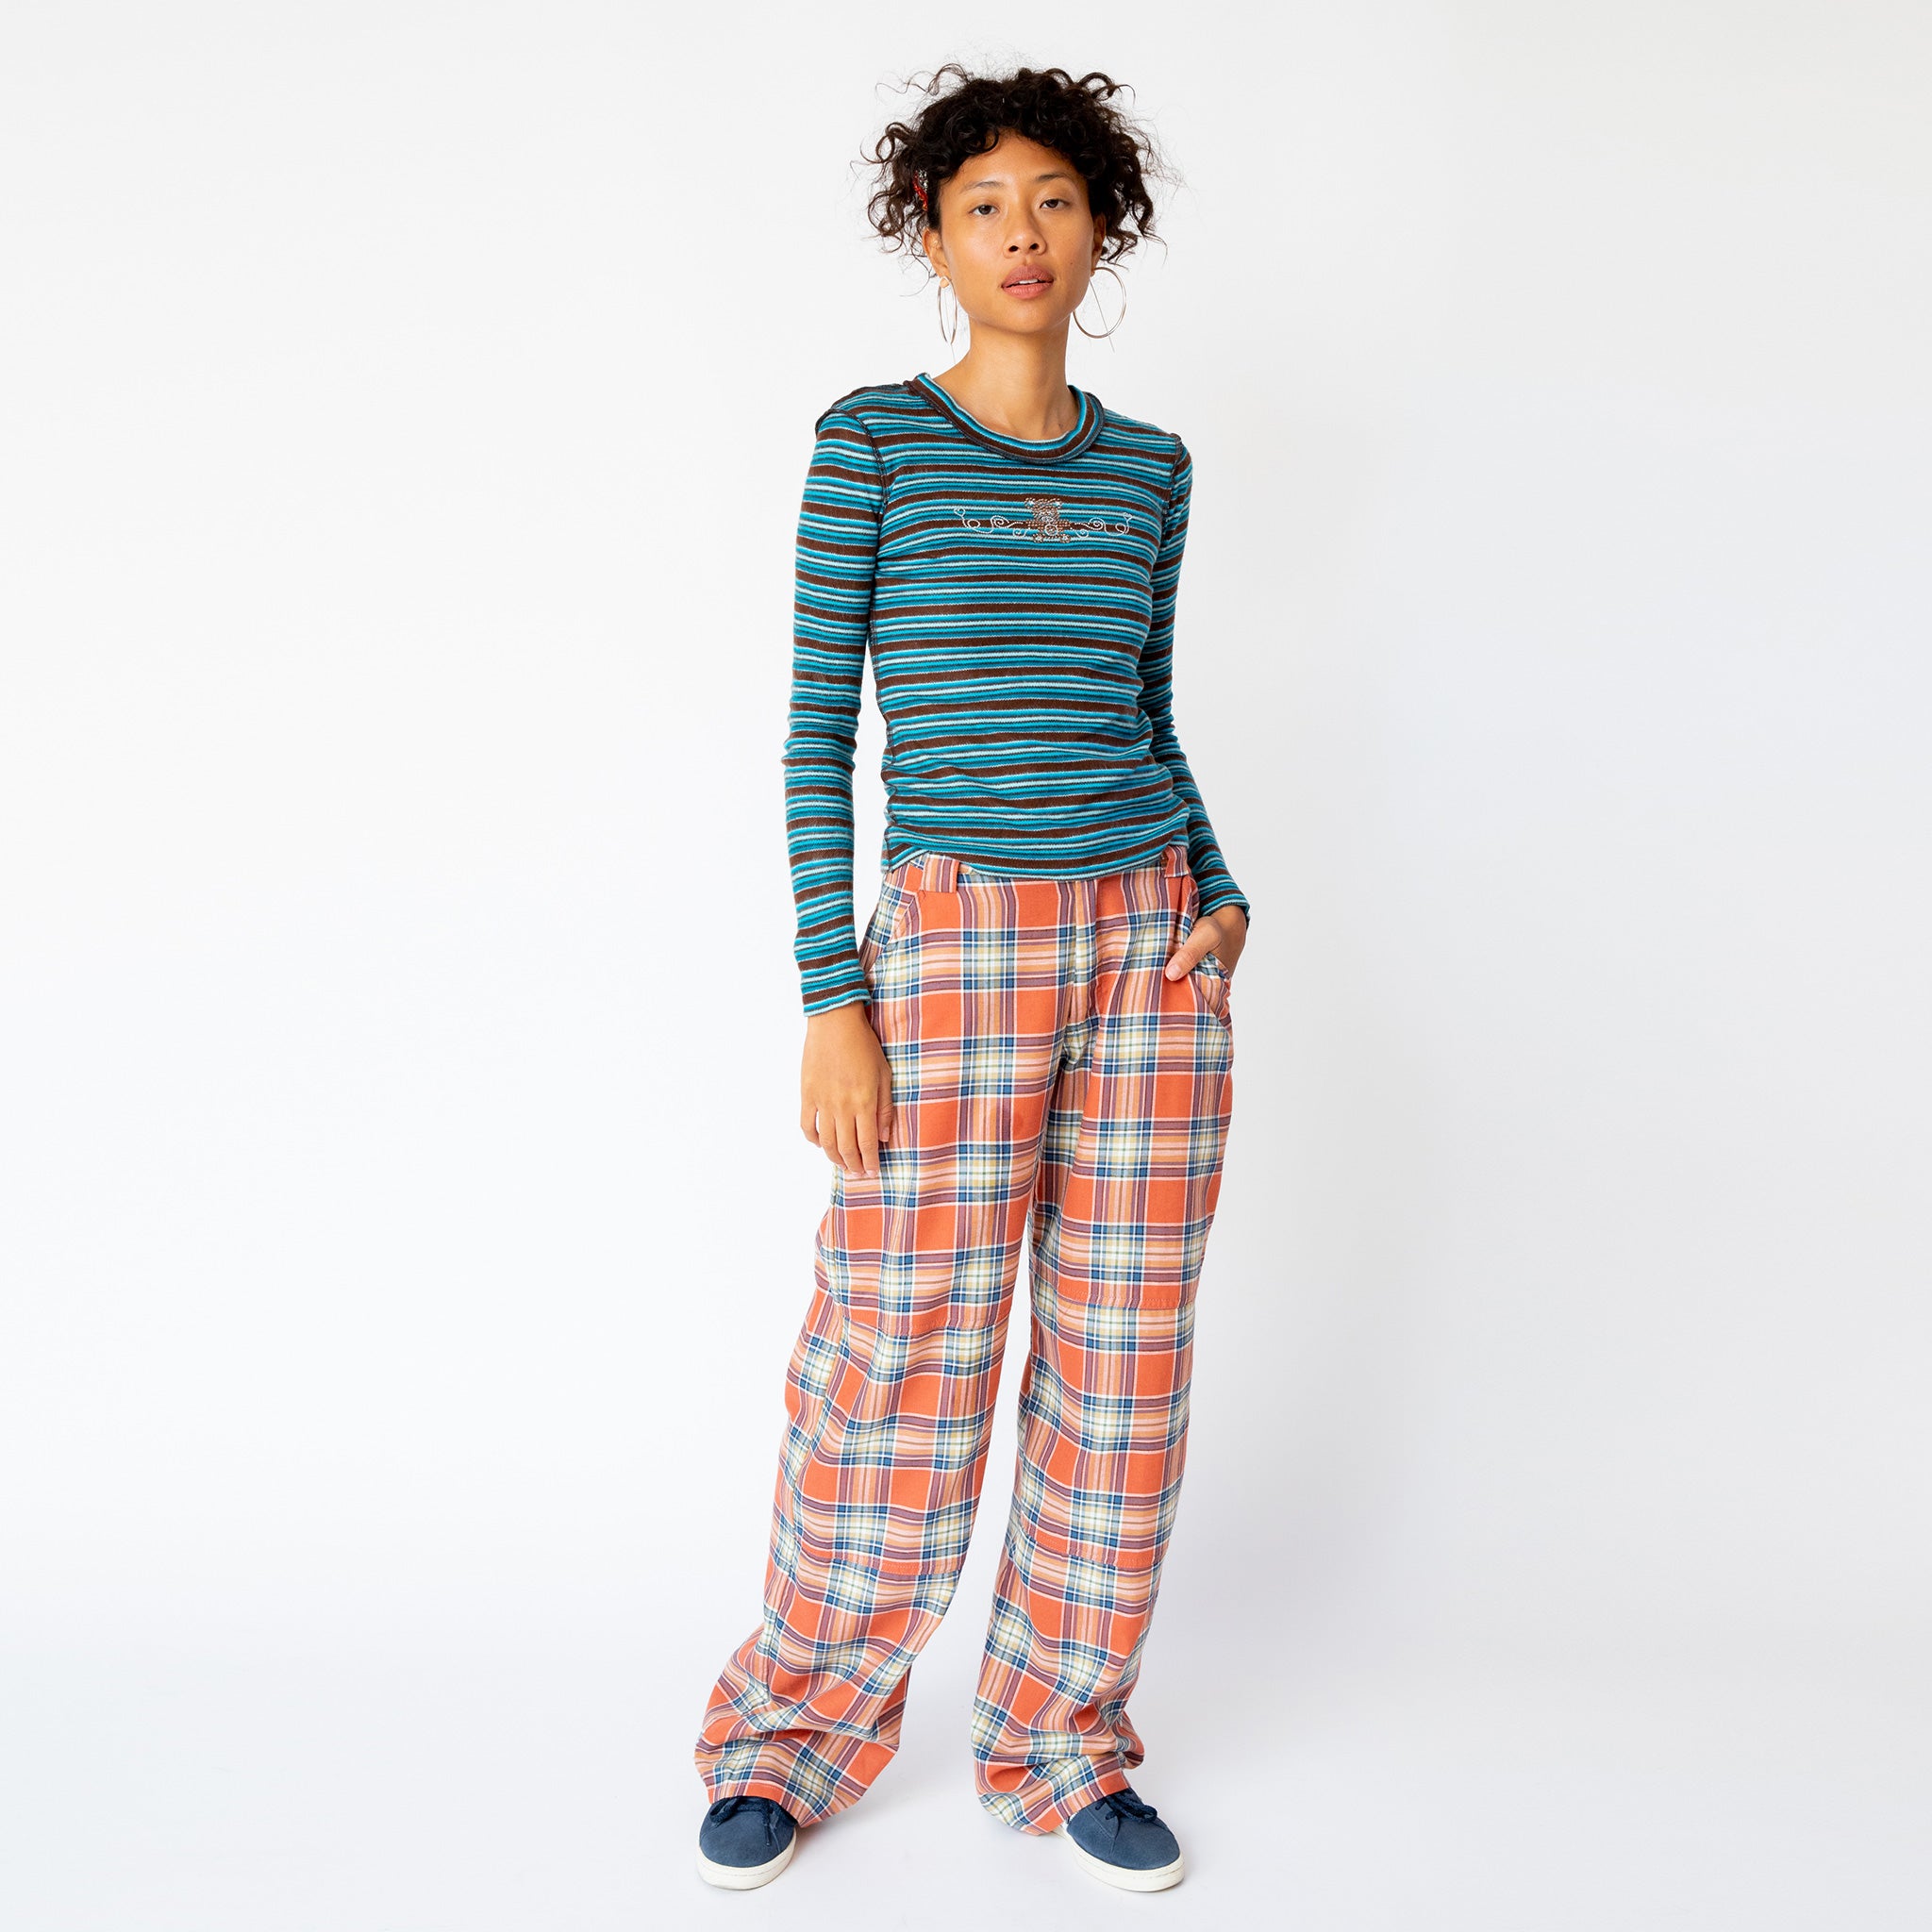 Full outfit view of the blue and brown striped Cardio Crew by Collina Strada featuring rhinestones on the chest in the shape of a teddy bear and swirls, paired with orange and white plaid wide leg pants..